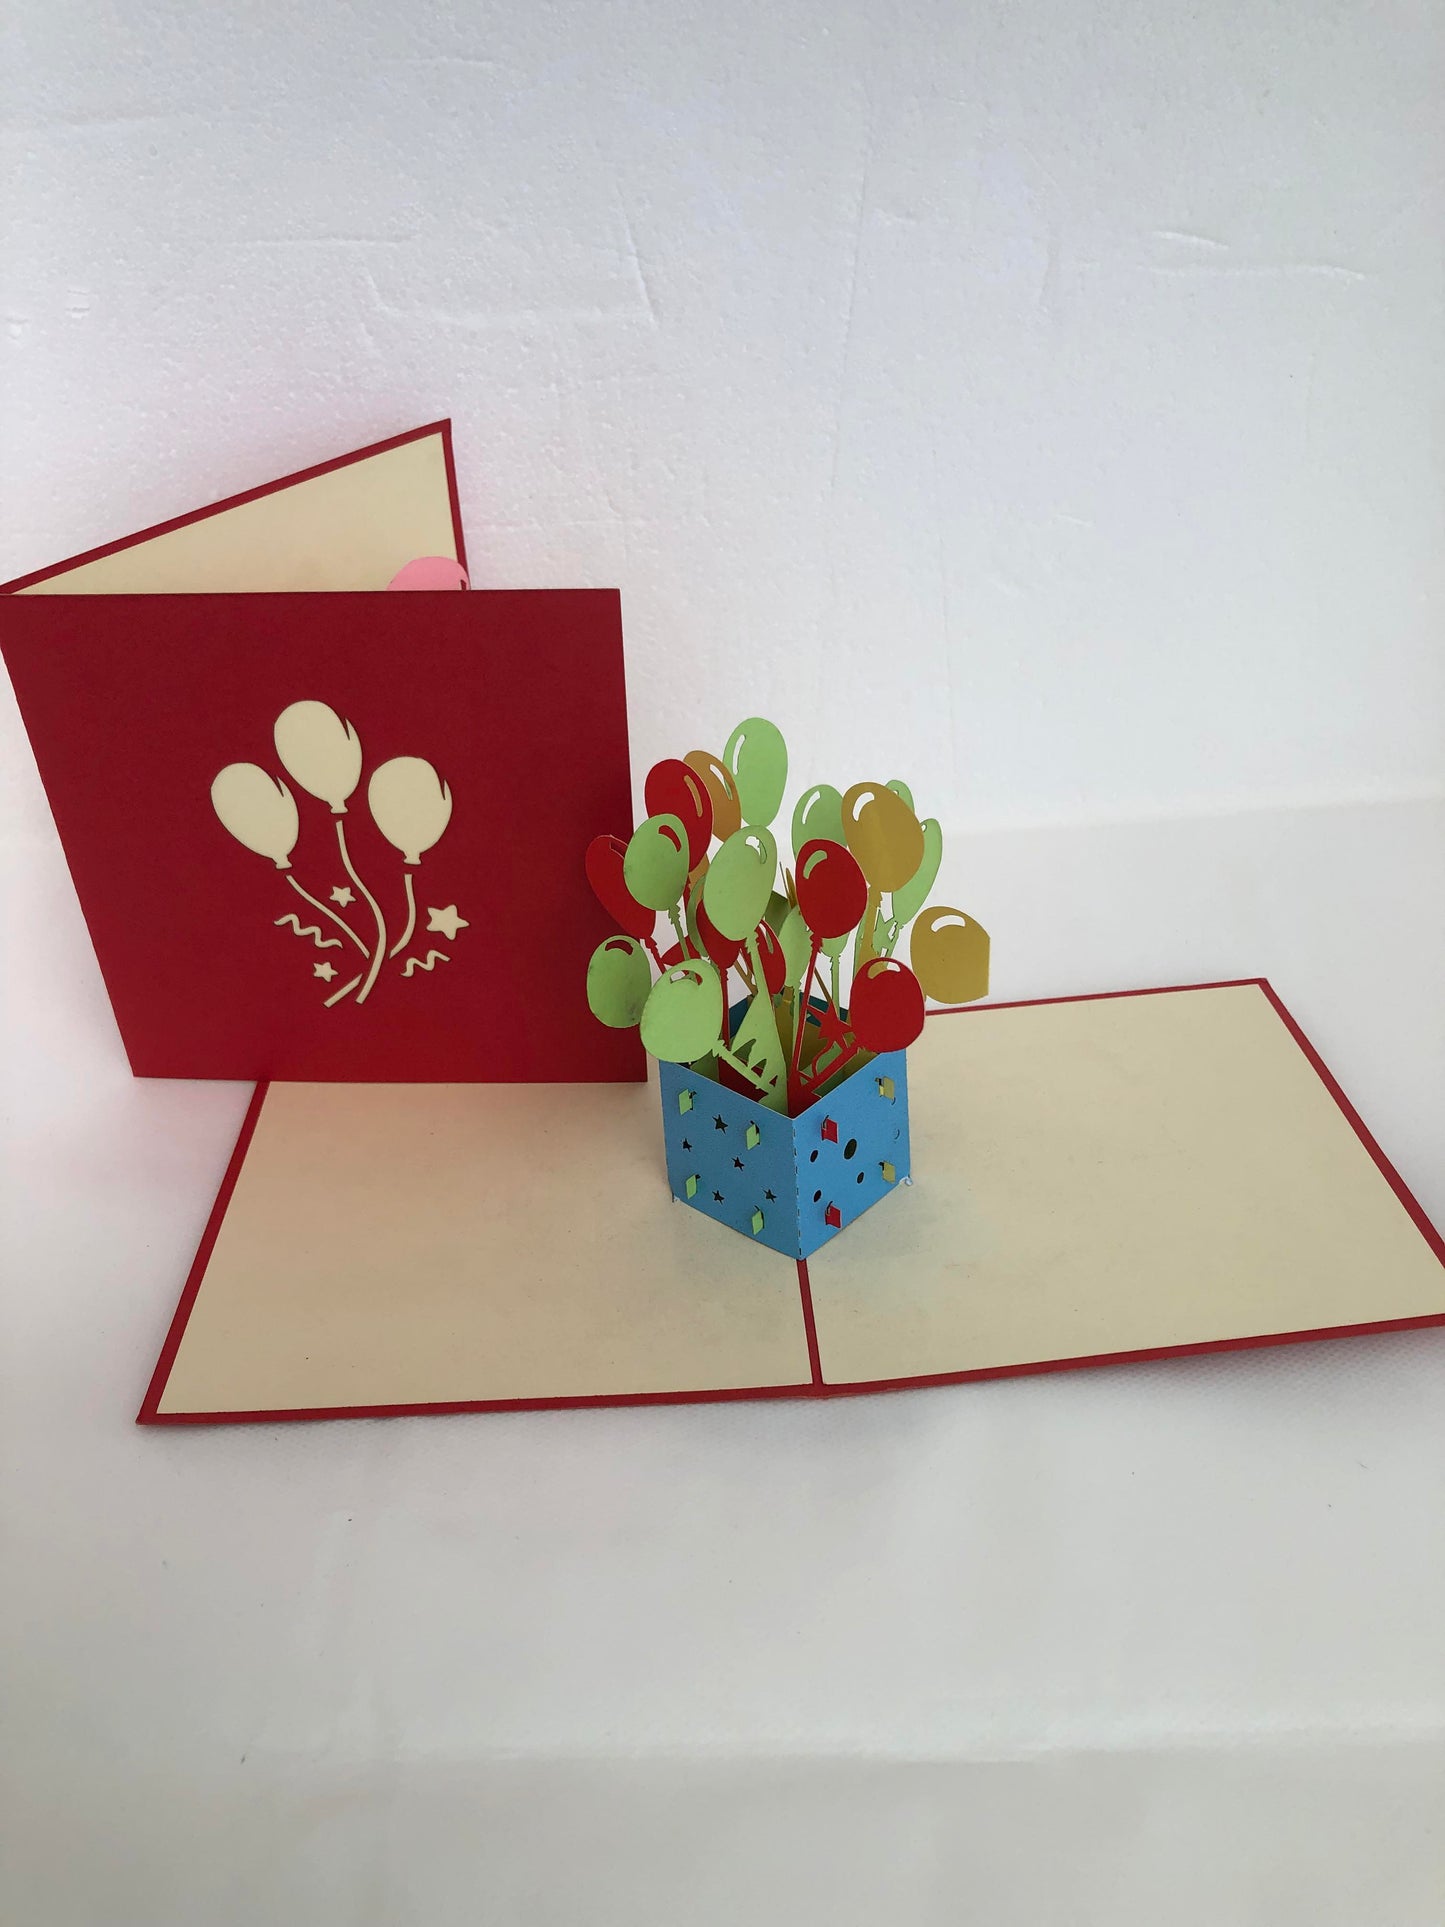 Small Pop Up Card Birthday Present Box of Balloons